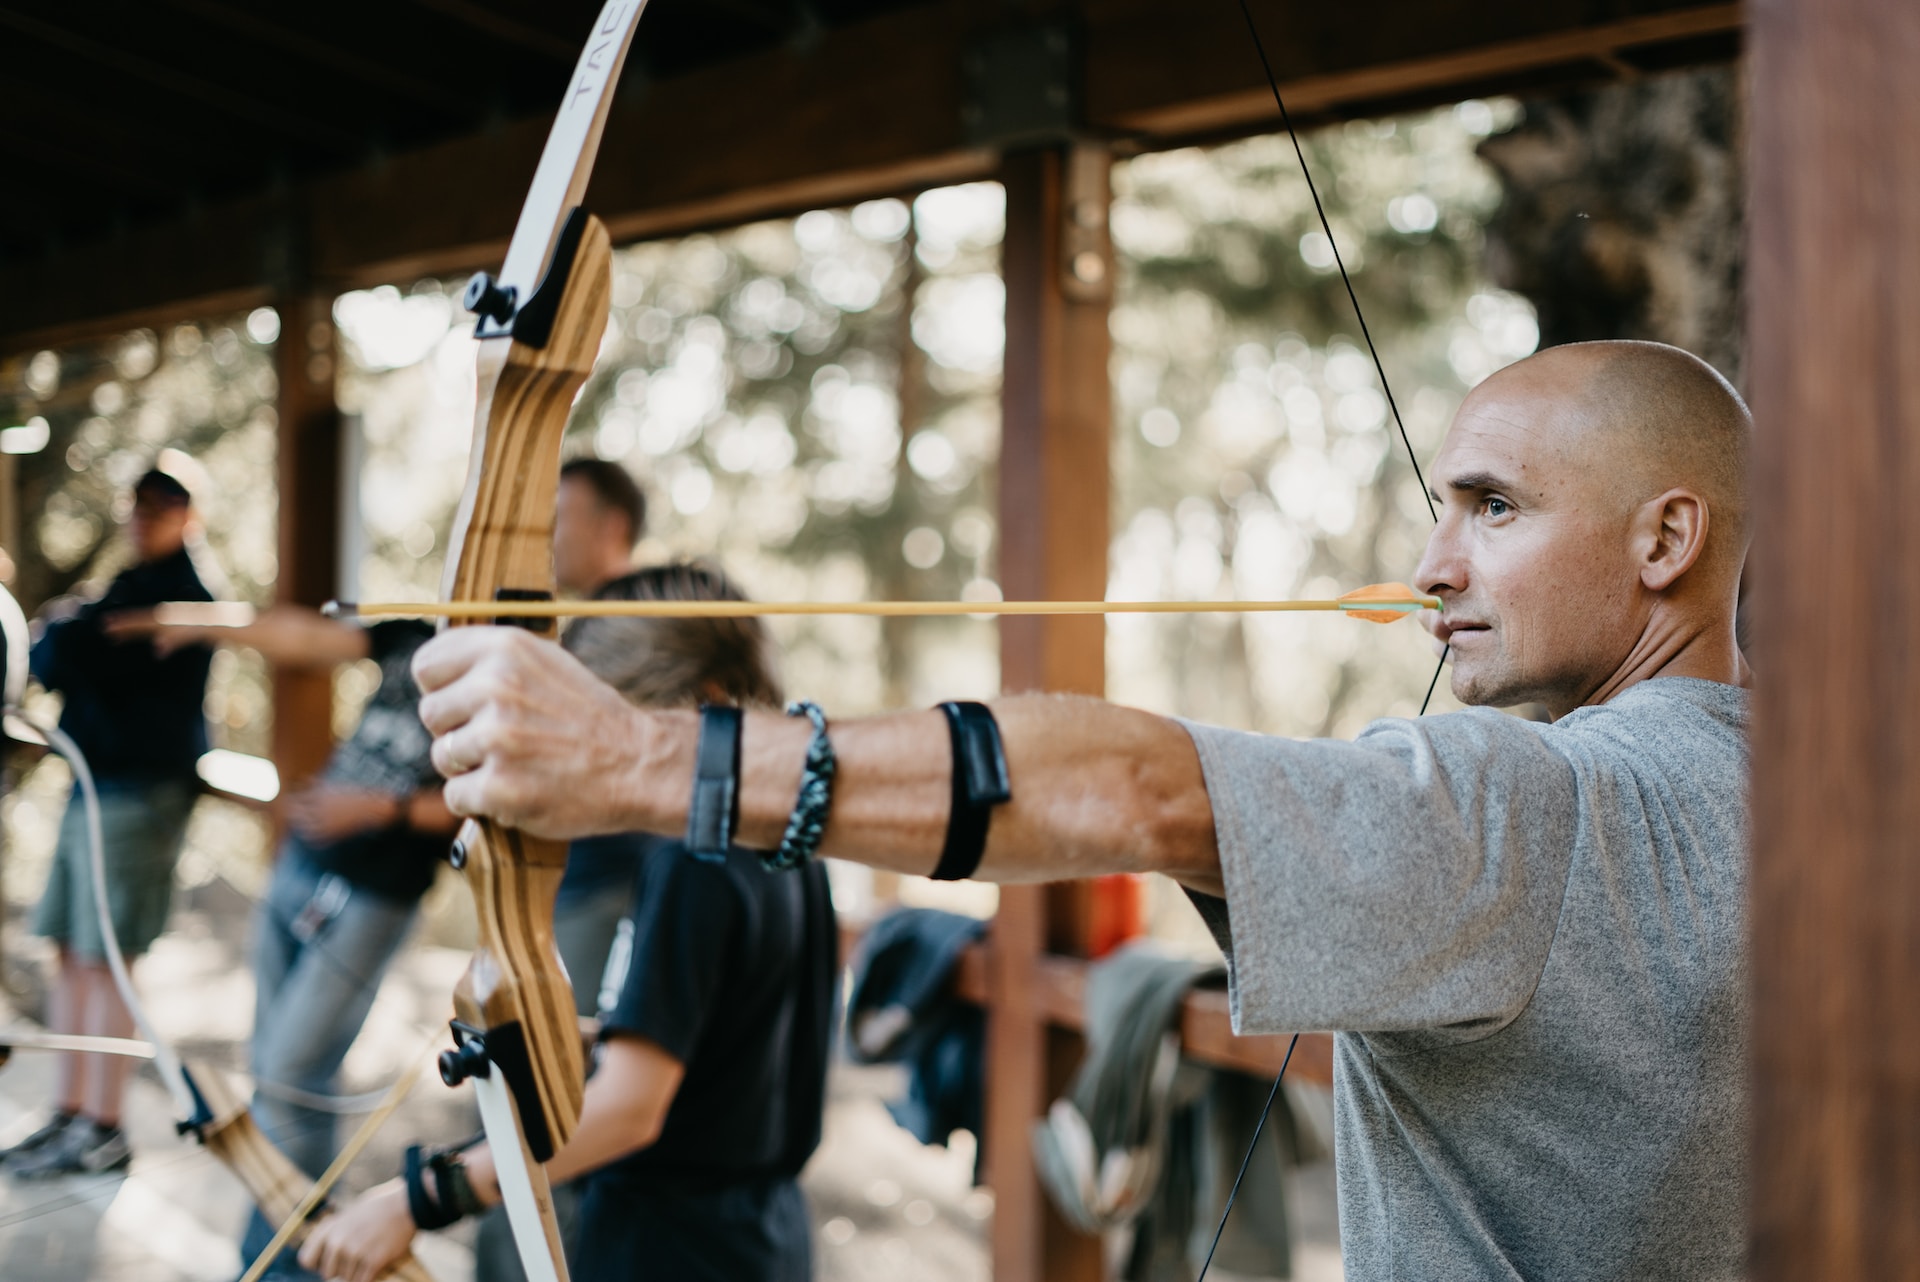 man at archery range aiming a recurve bow